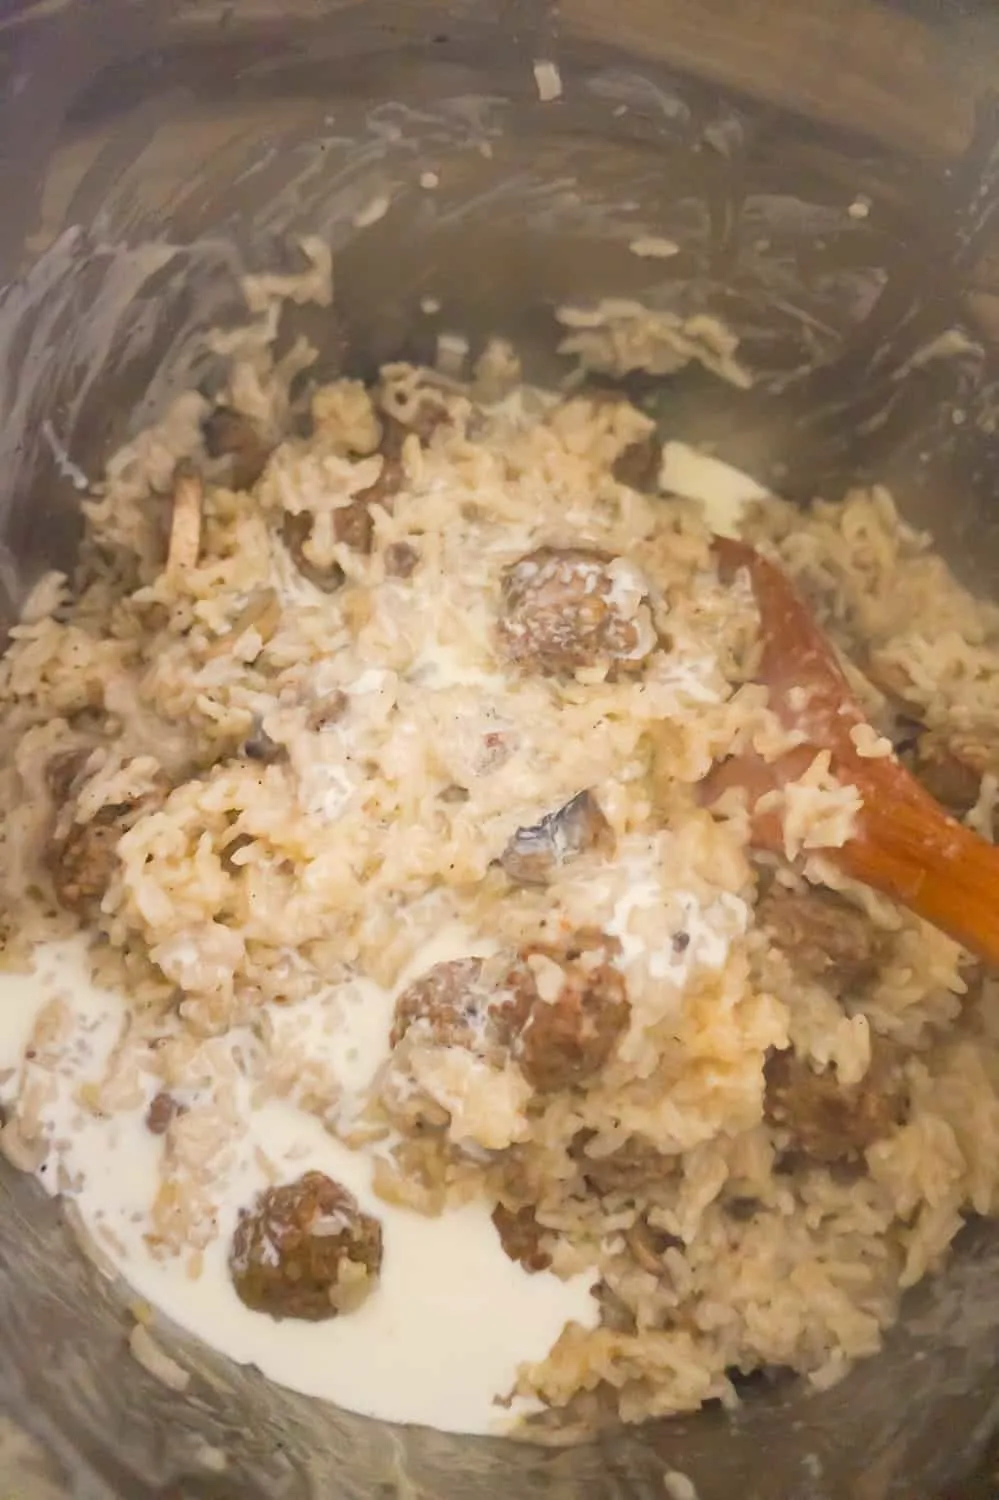 heavy cream, meatballs and rice after cooking in an Instant Pot